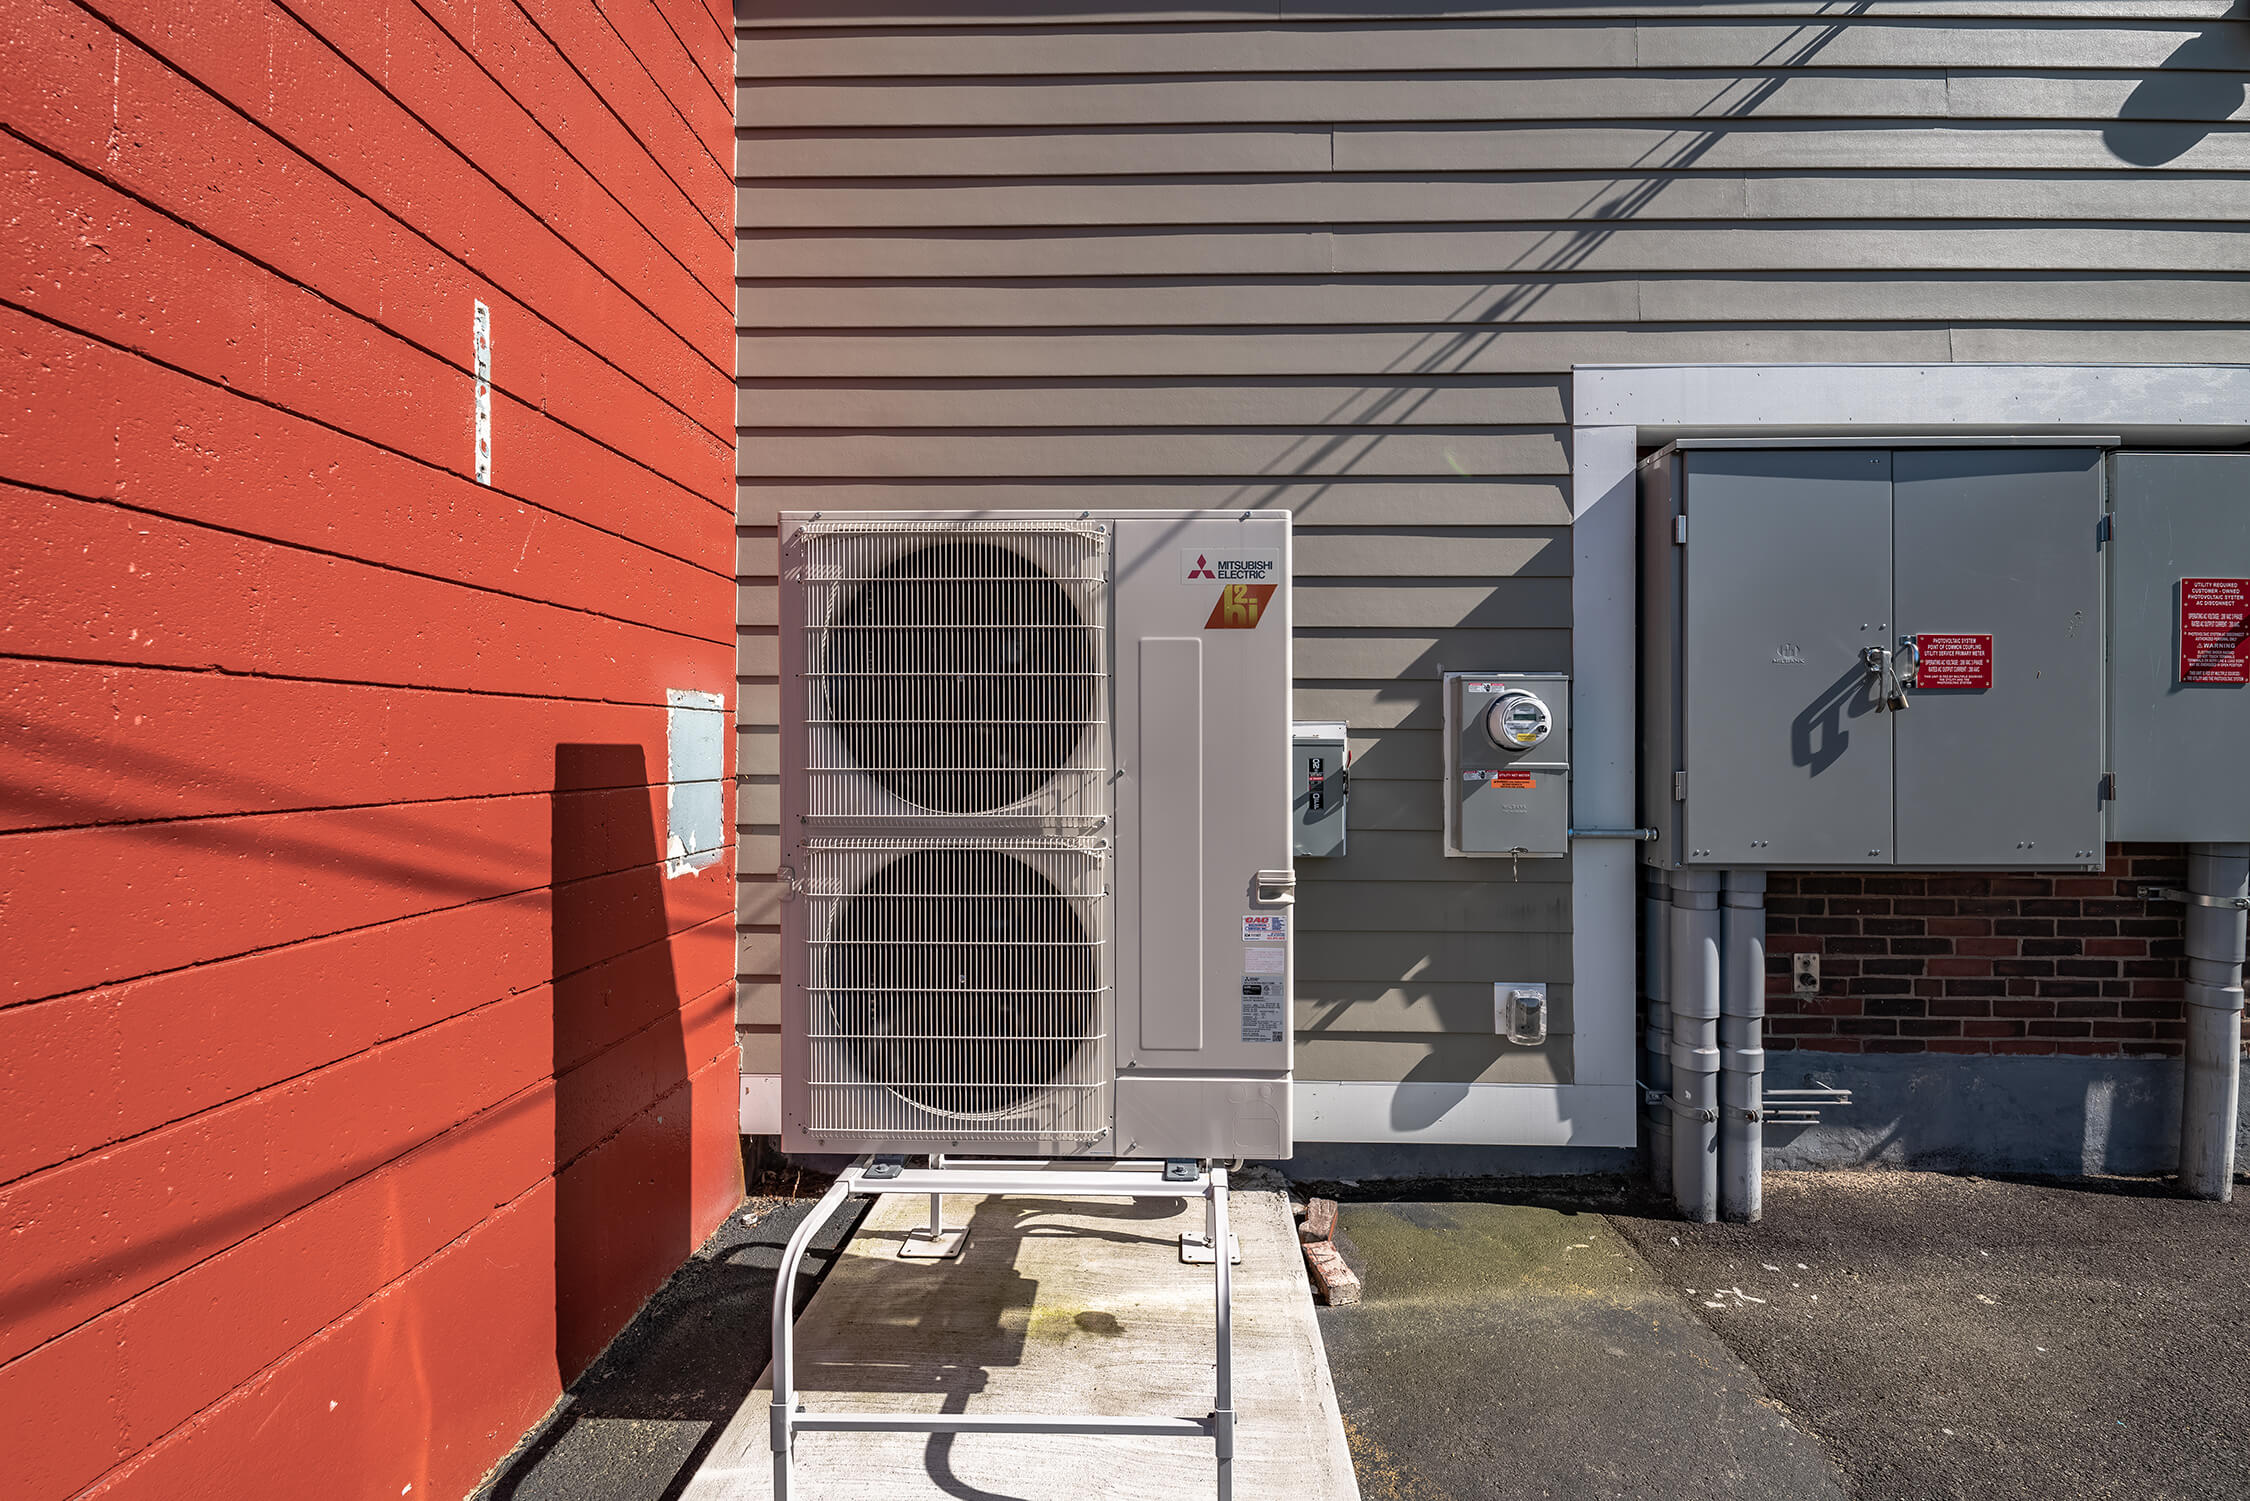 An AC unit in the corner of a building with red and gray shingles